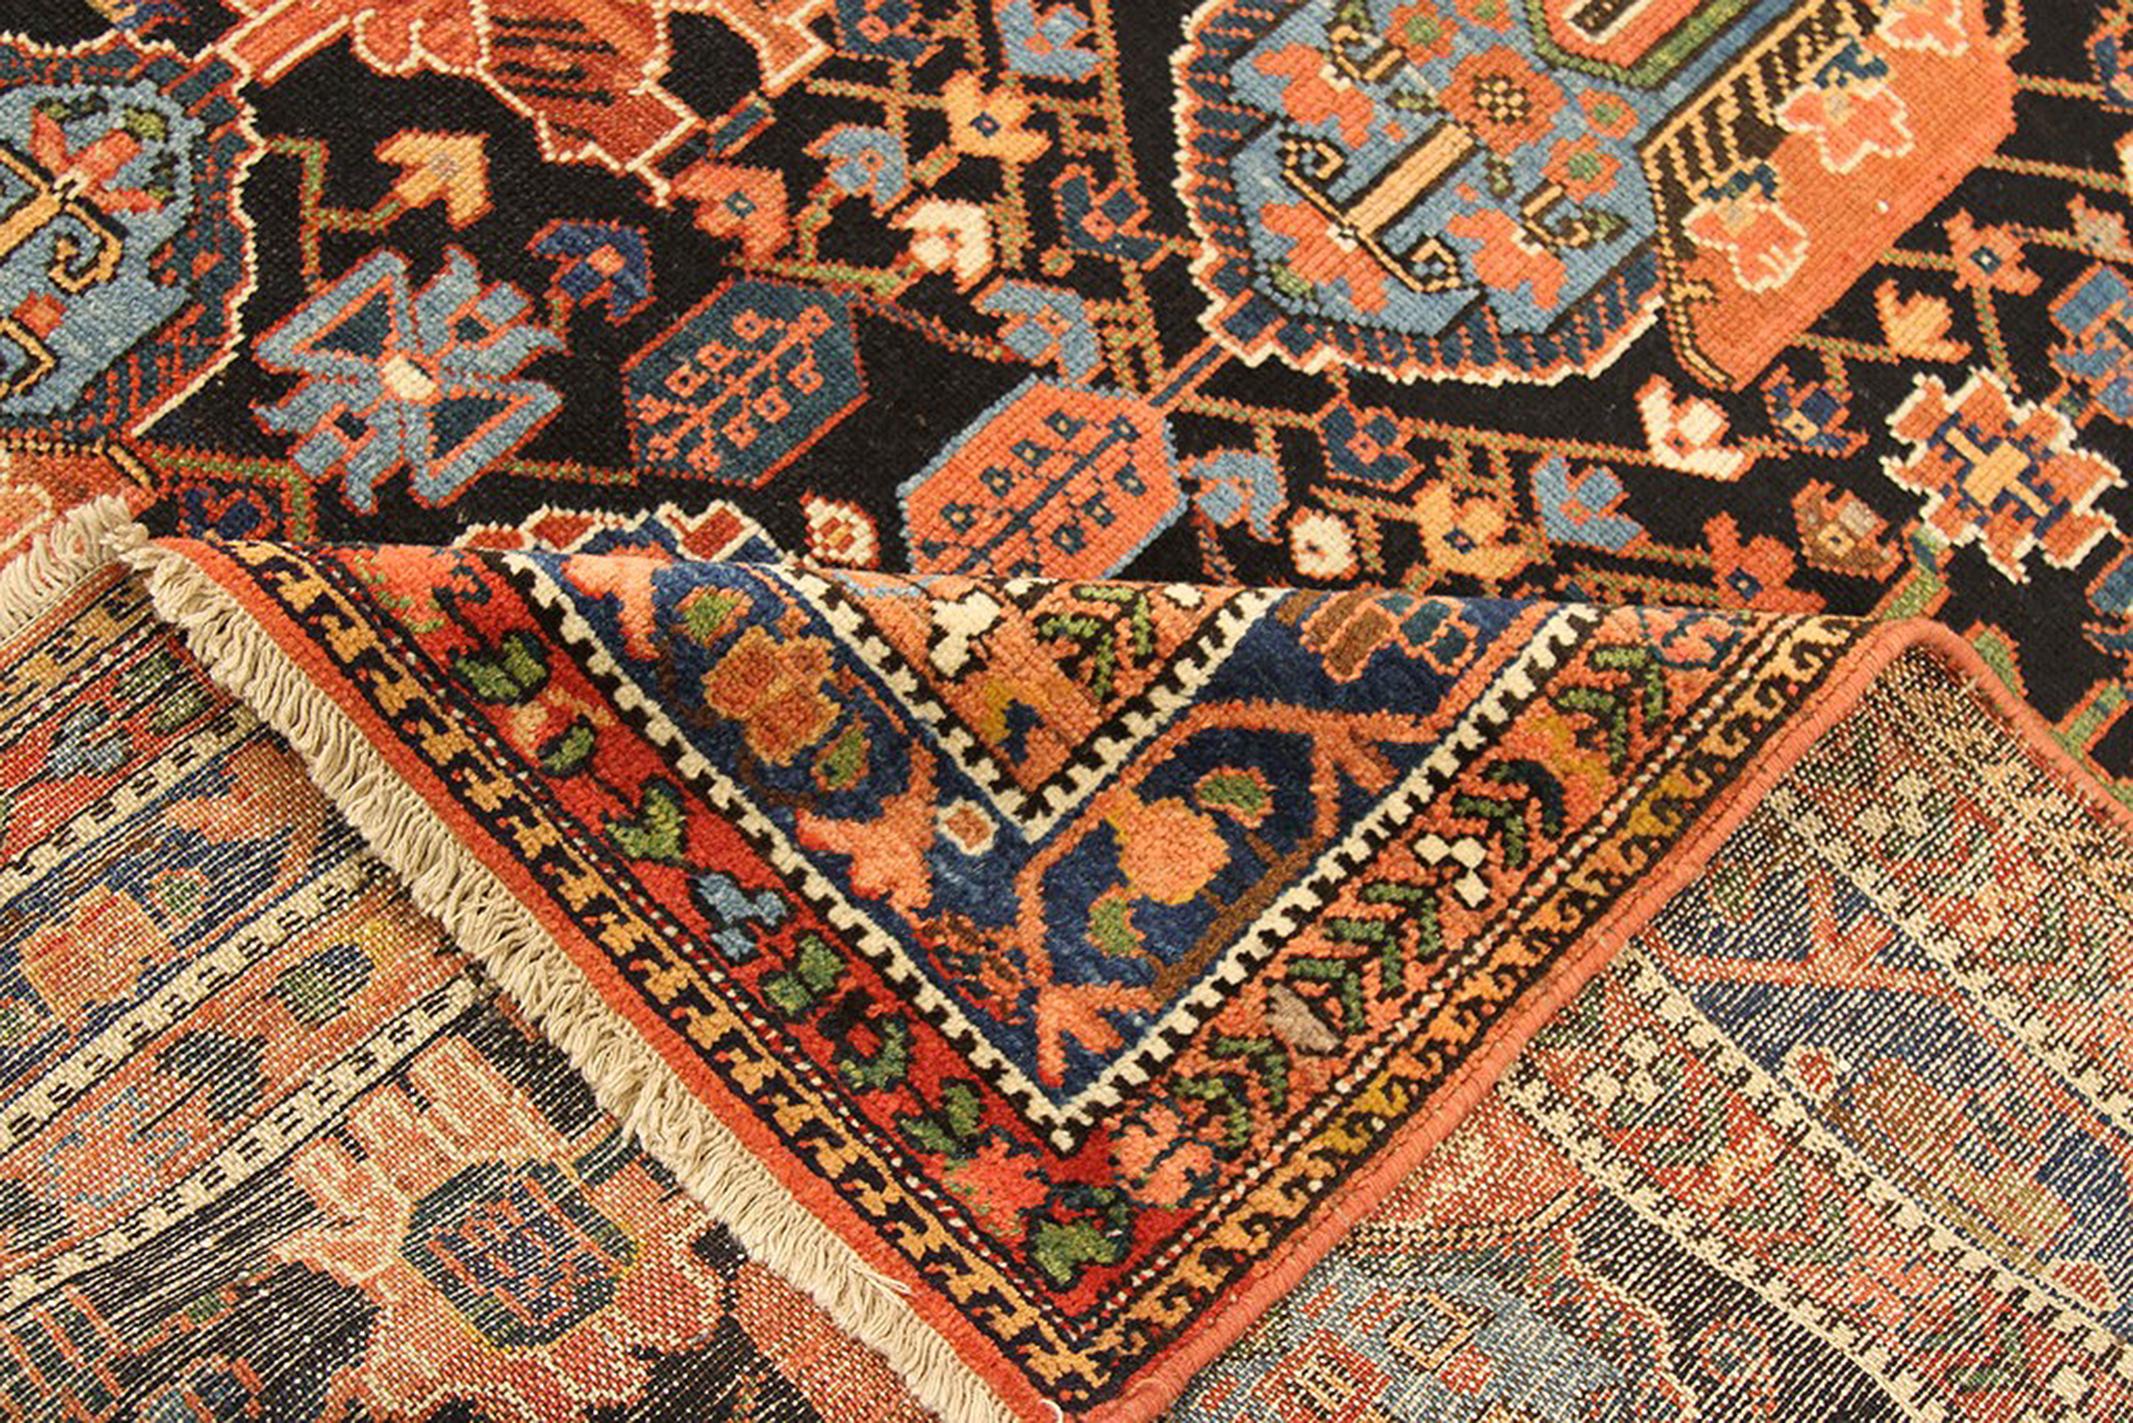 Antique Persian rug handwoven from the finest sheep’s wool and colored with all-natural vegetable dyes that are safe for humans and pets. It’s a traditional Bakhtiar design highlighted by large blue and orange floral medallions in blue and orange